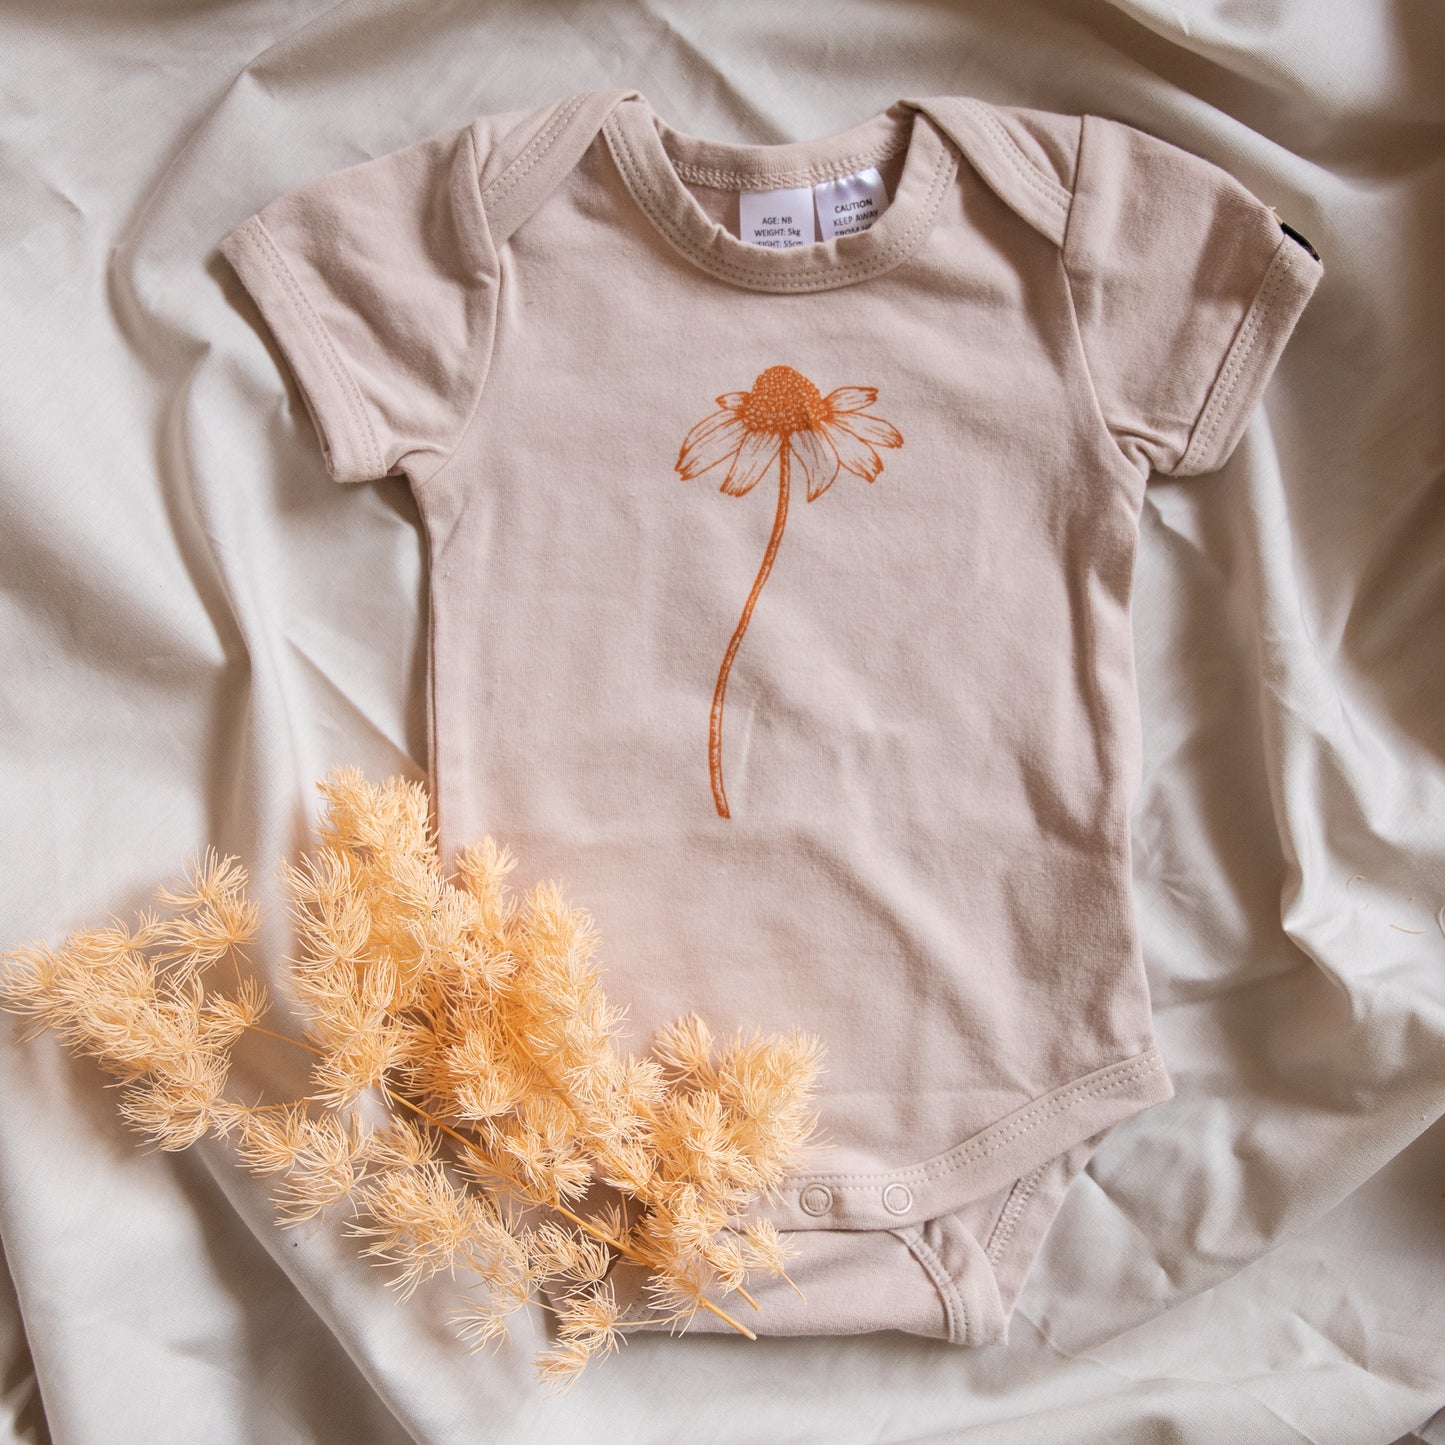 Grow into Love romper and shirt